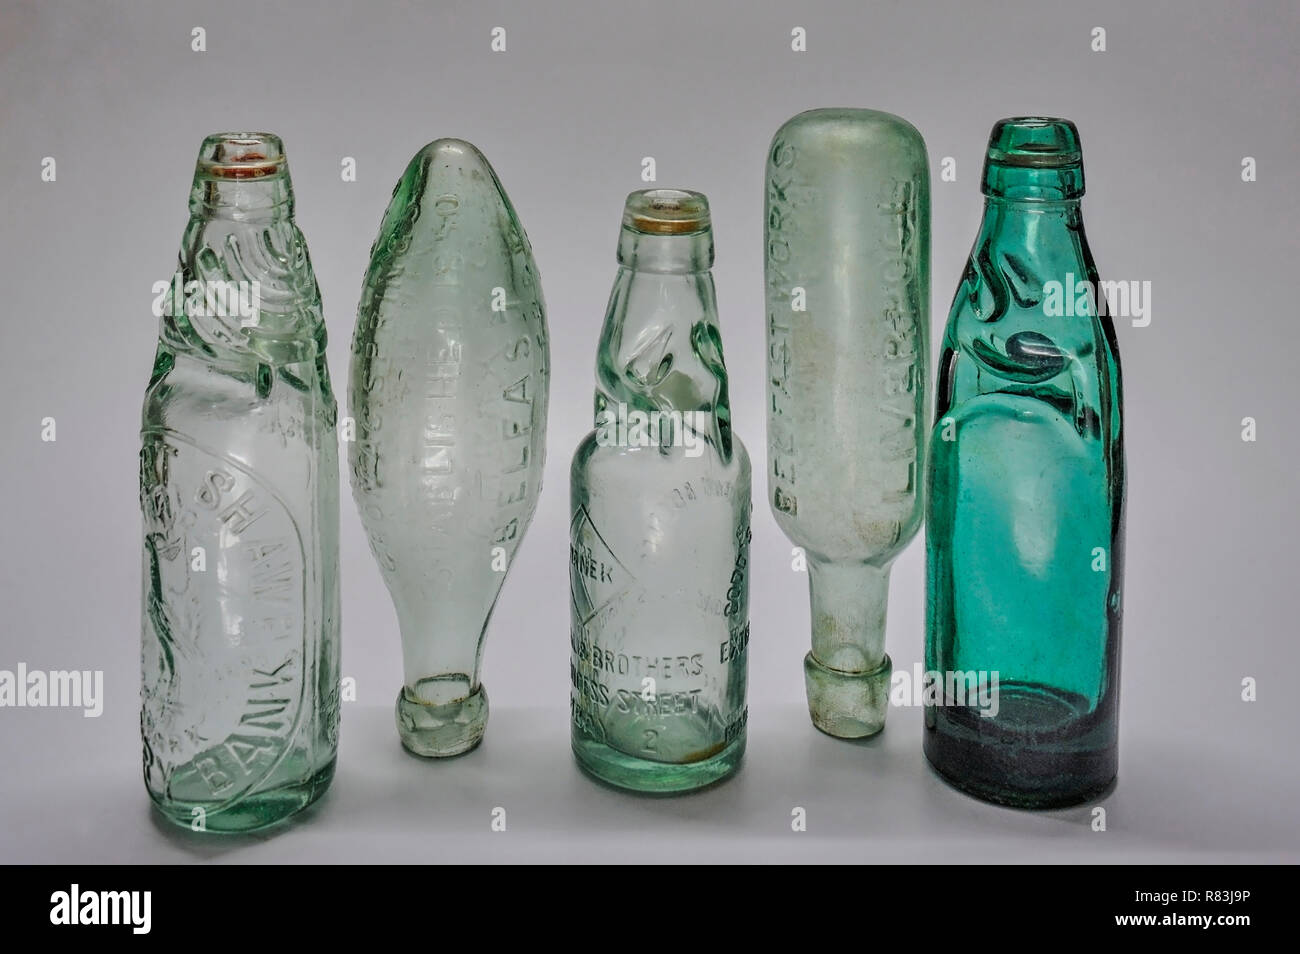 29-Apr-2011-Vintage Bottle-Antique Mineral and Soda Water Bottles Stock Photo